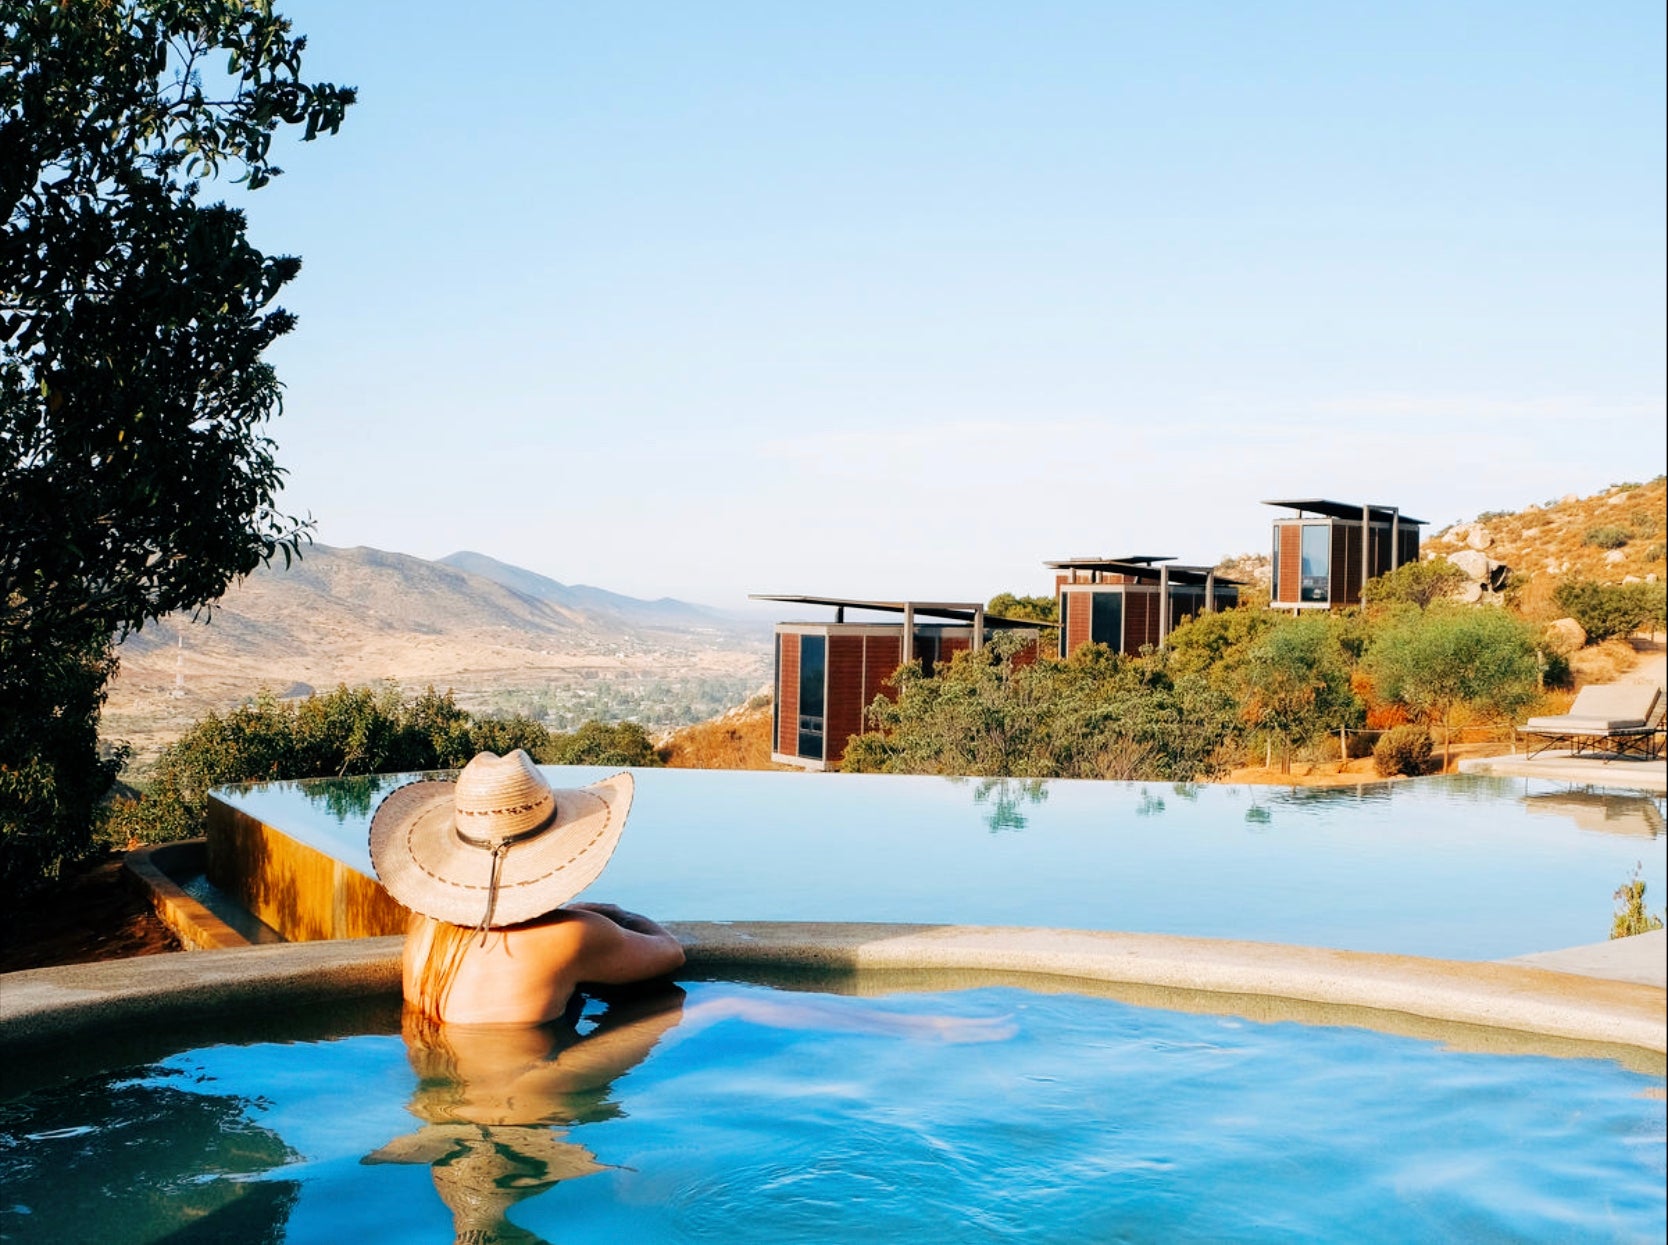 #TravelTalk: A Weekend Getaway in Mexico with Laura Davidson